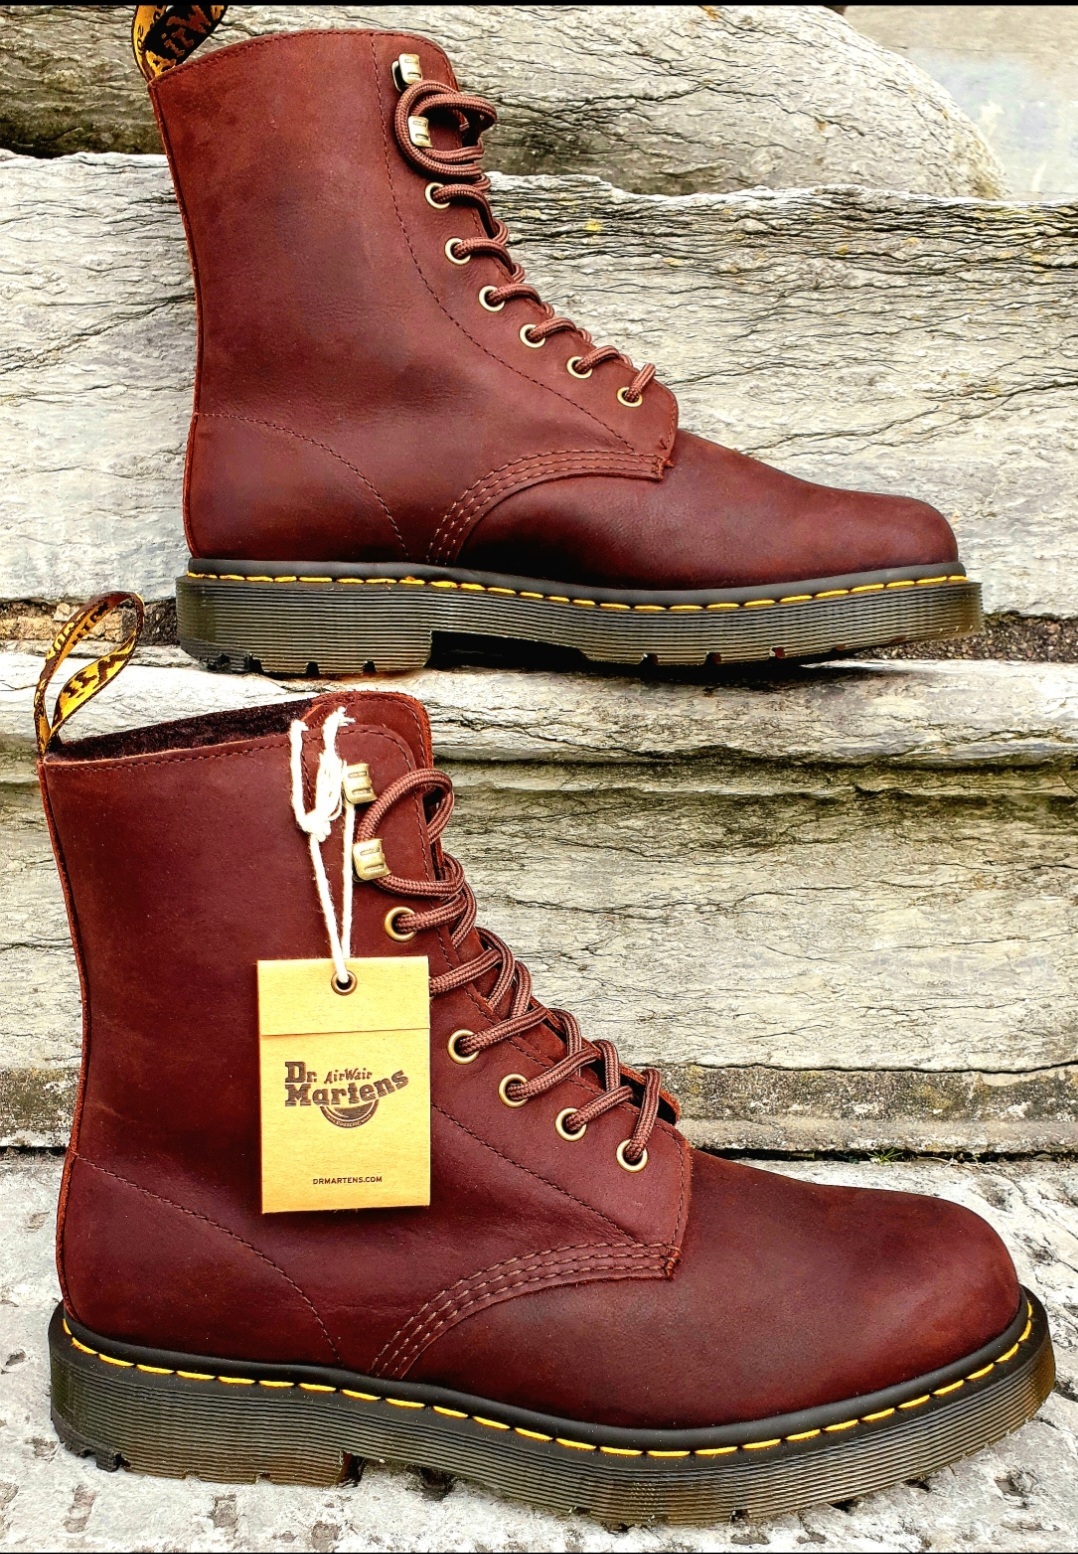 DR. MARTENS 1460 PASCAL WINTER GRIP OUTLAW BROWN - Store - McCarthy's Cork